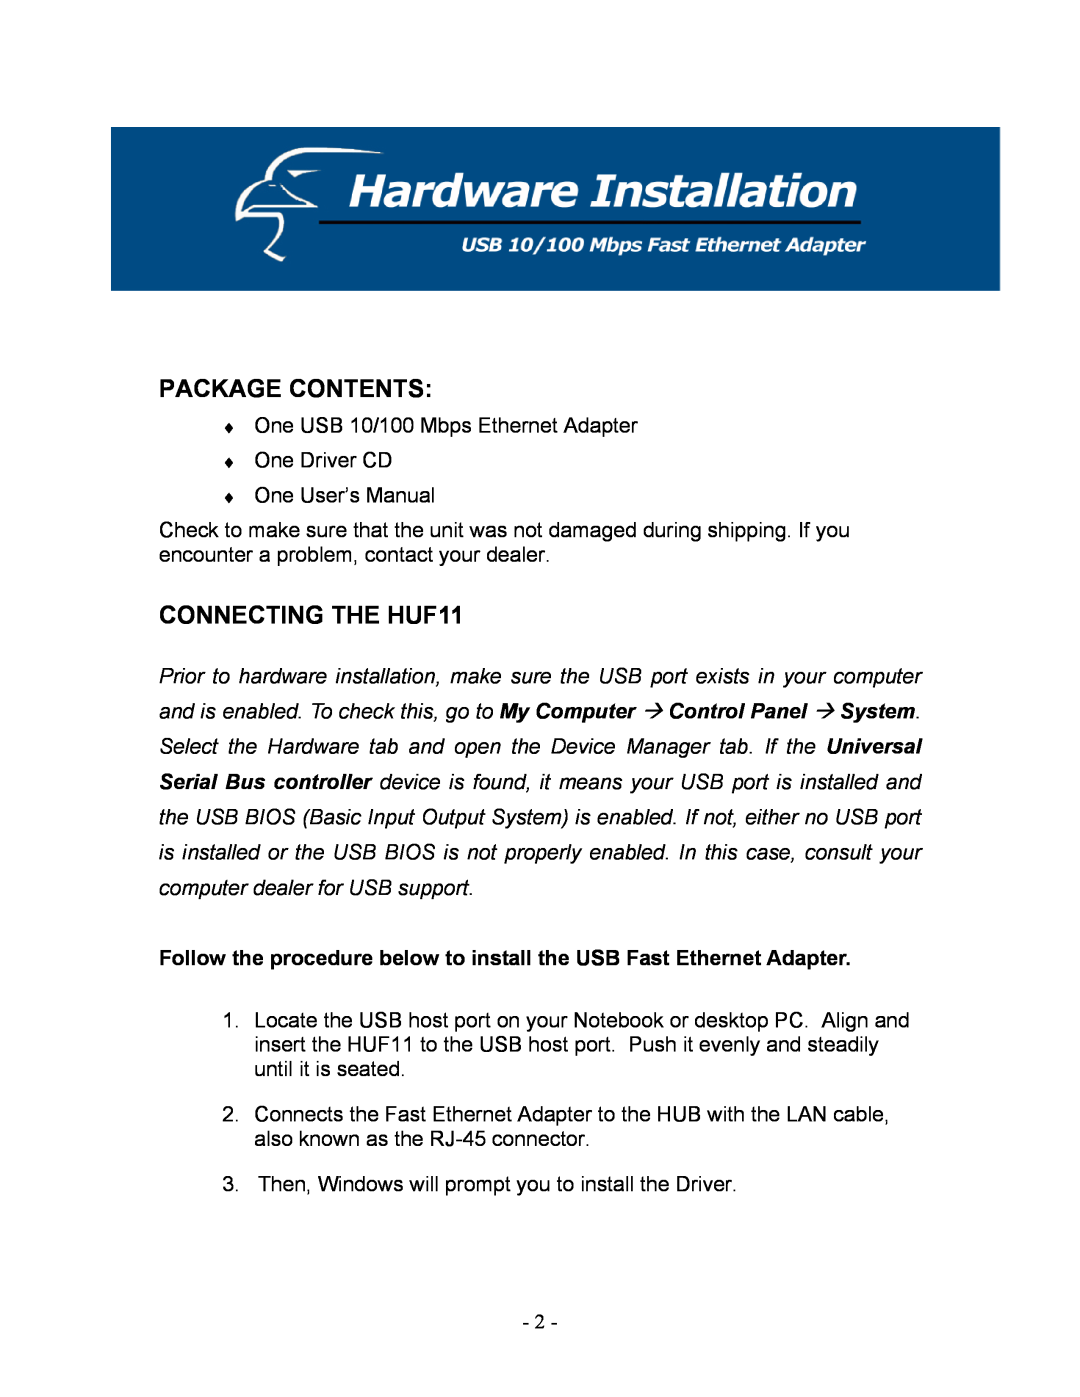 Hawking Technology USB 10/100 Mbps user manual Package Contents, CONNECTING THE HUF11 